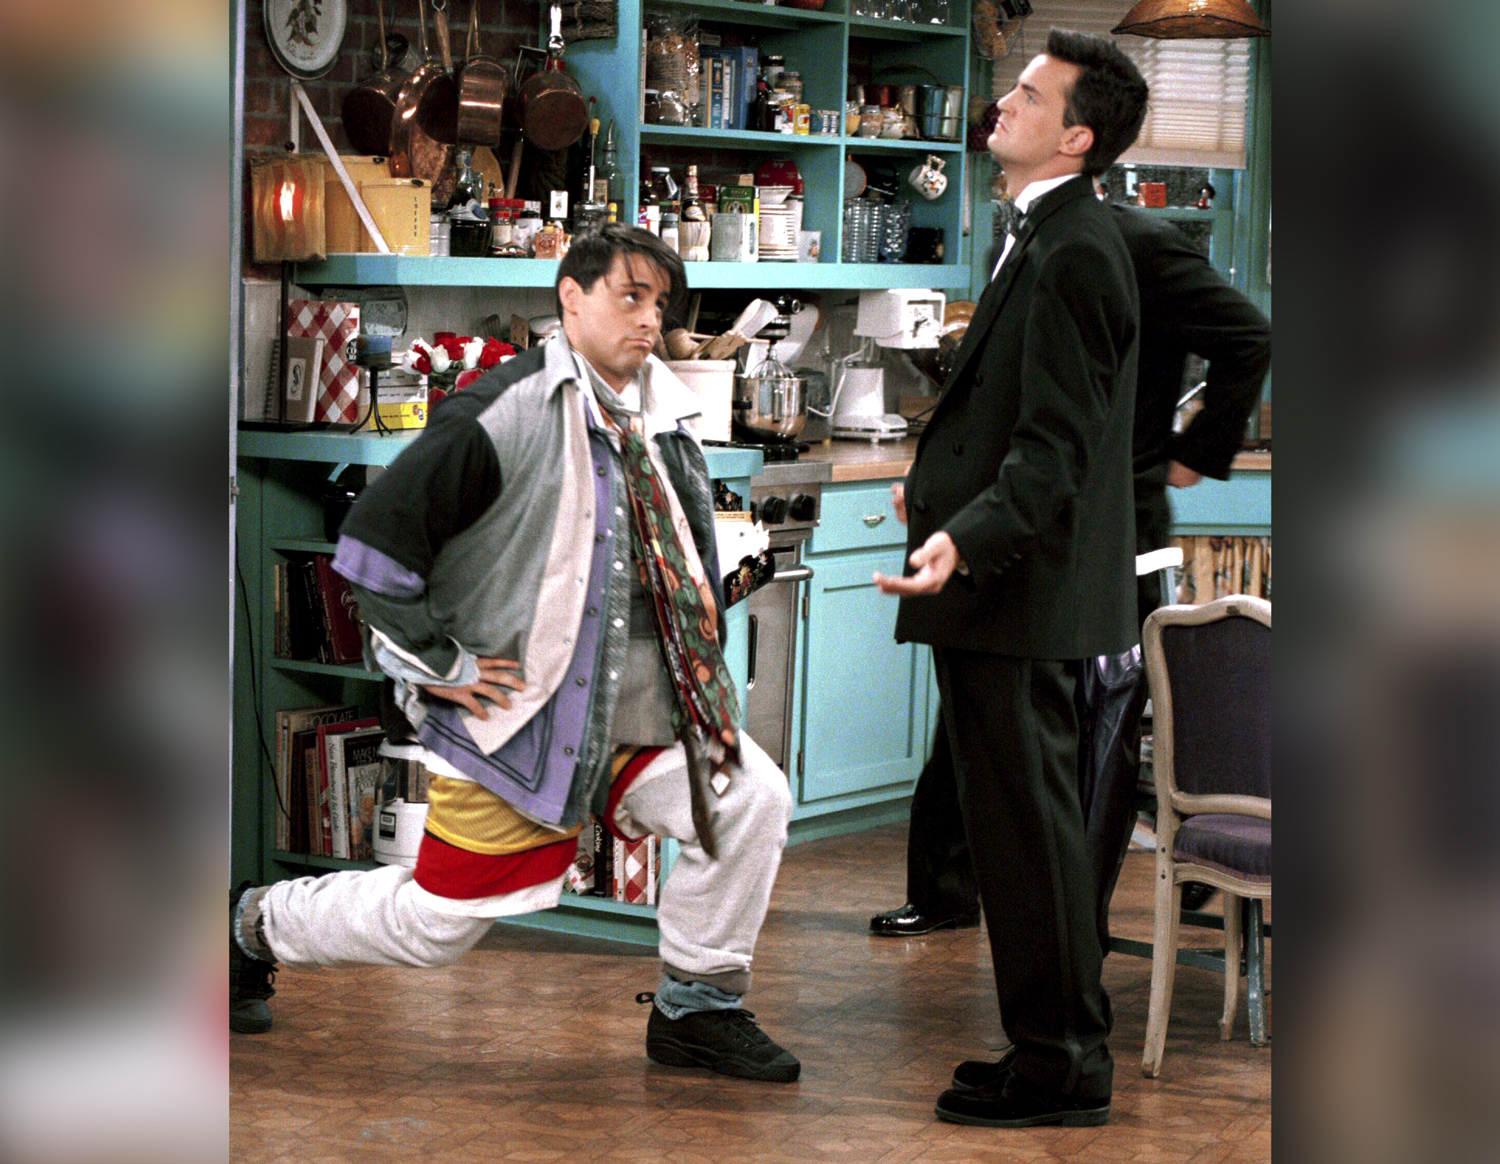 A scene from the show Friends, in which Chandler sees that Joey is wearing all of his clothes.